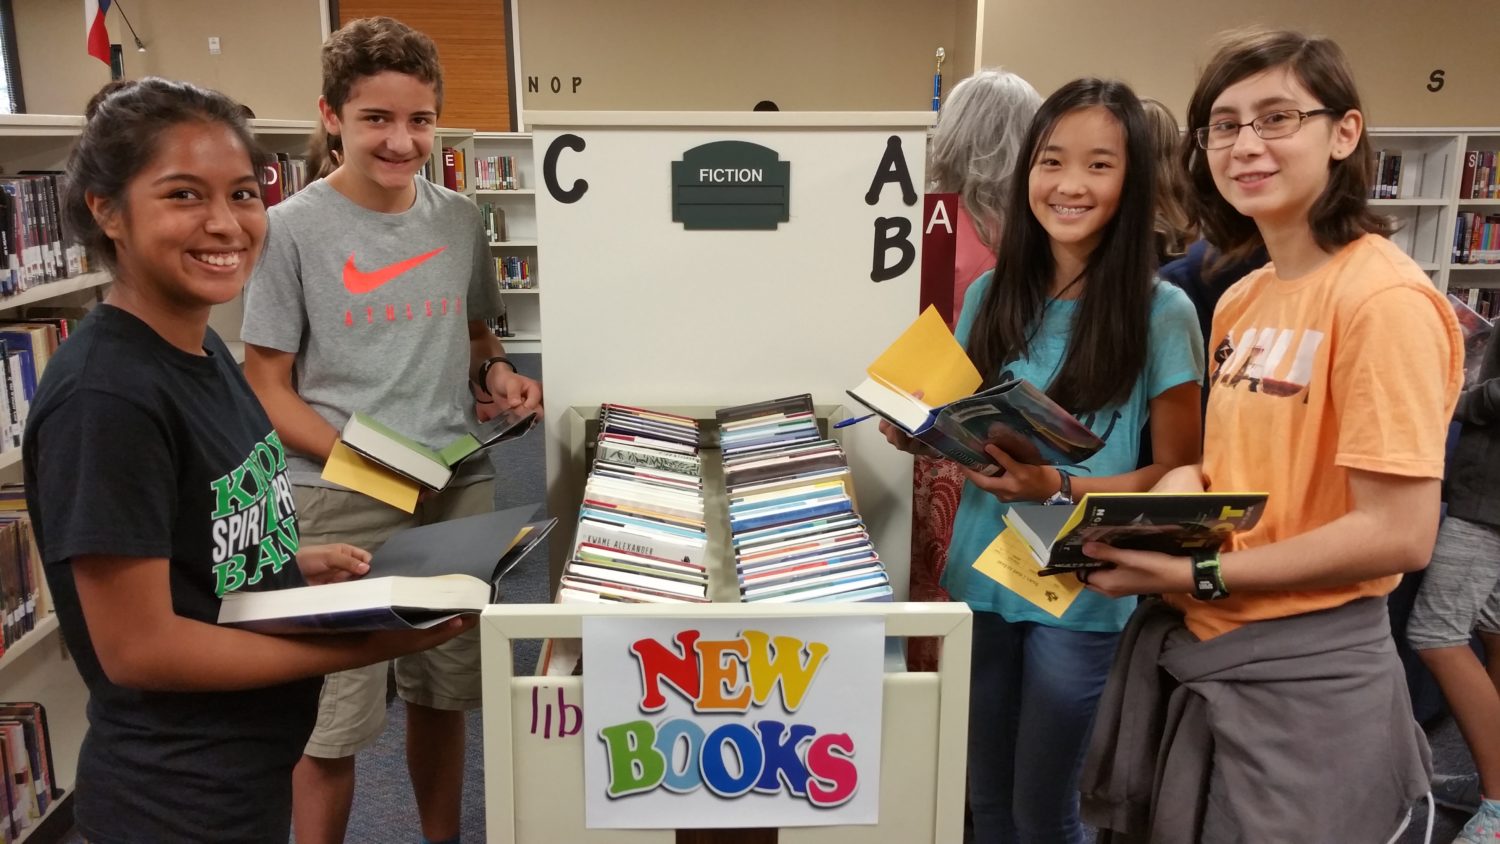 Eighth grade students at Knox explore the new book arrivals in the library.